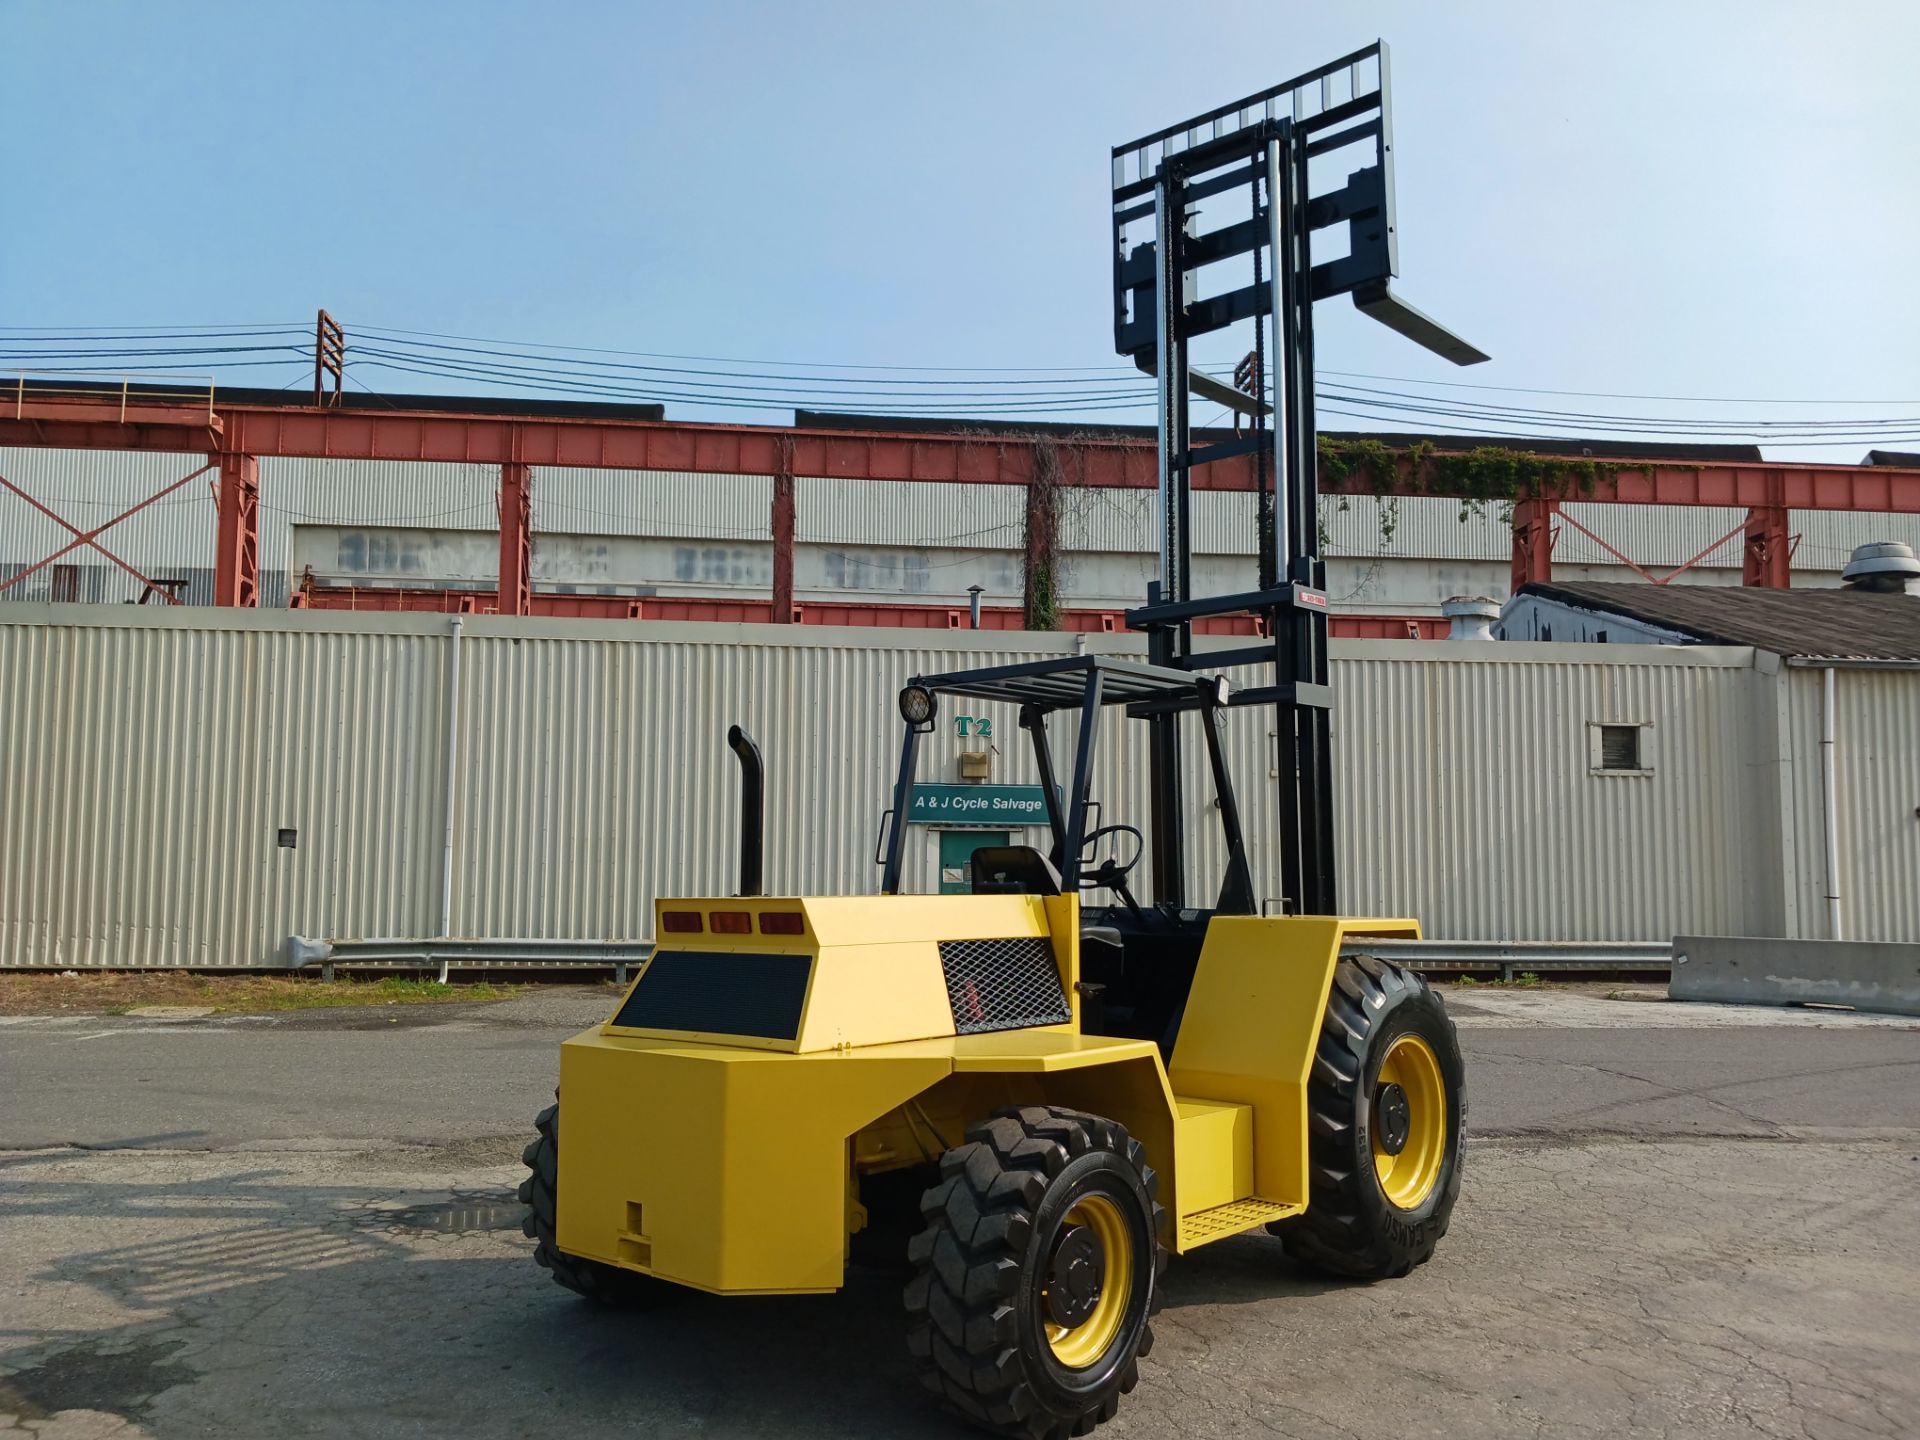 Sellick SD-80 8,000 lb Forklift - Lester, PA - Image 9 of 14